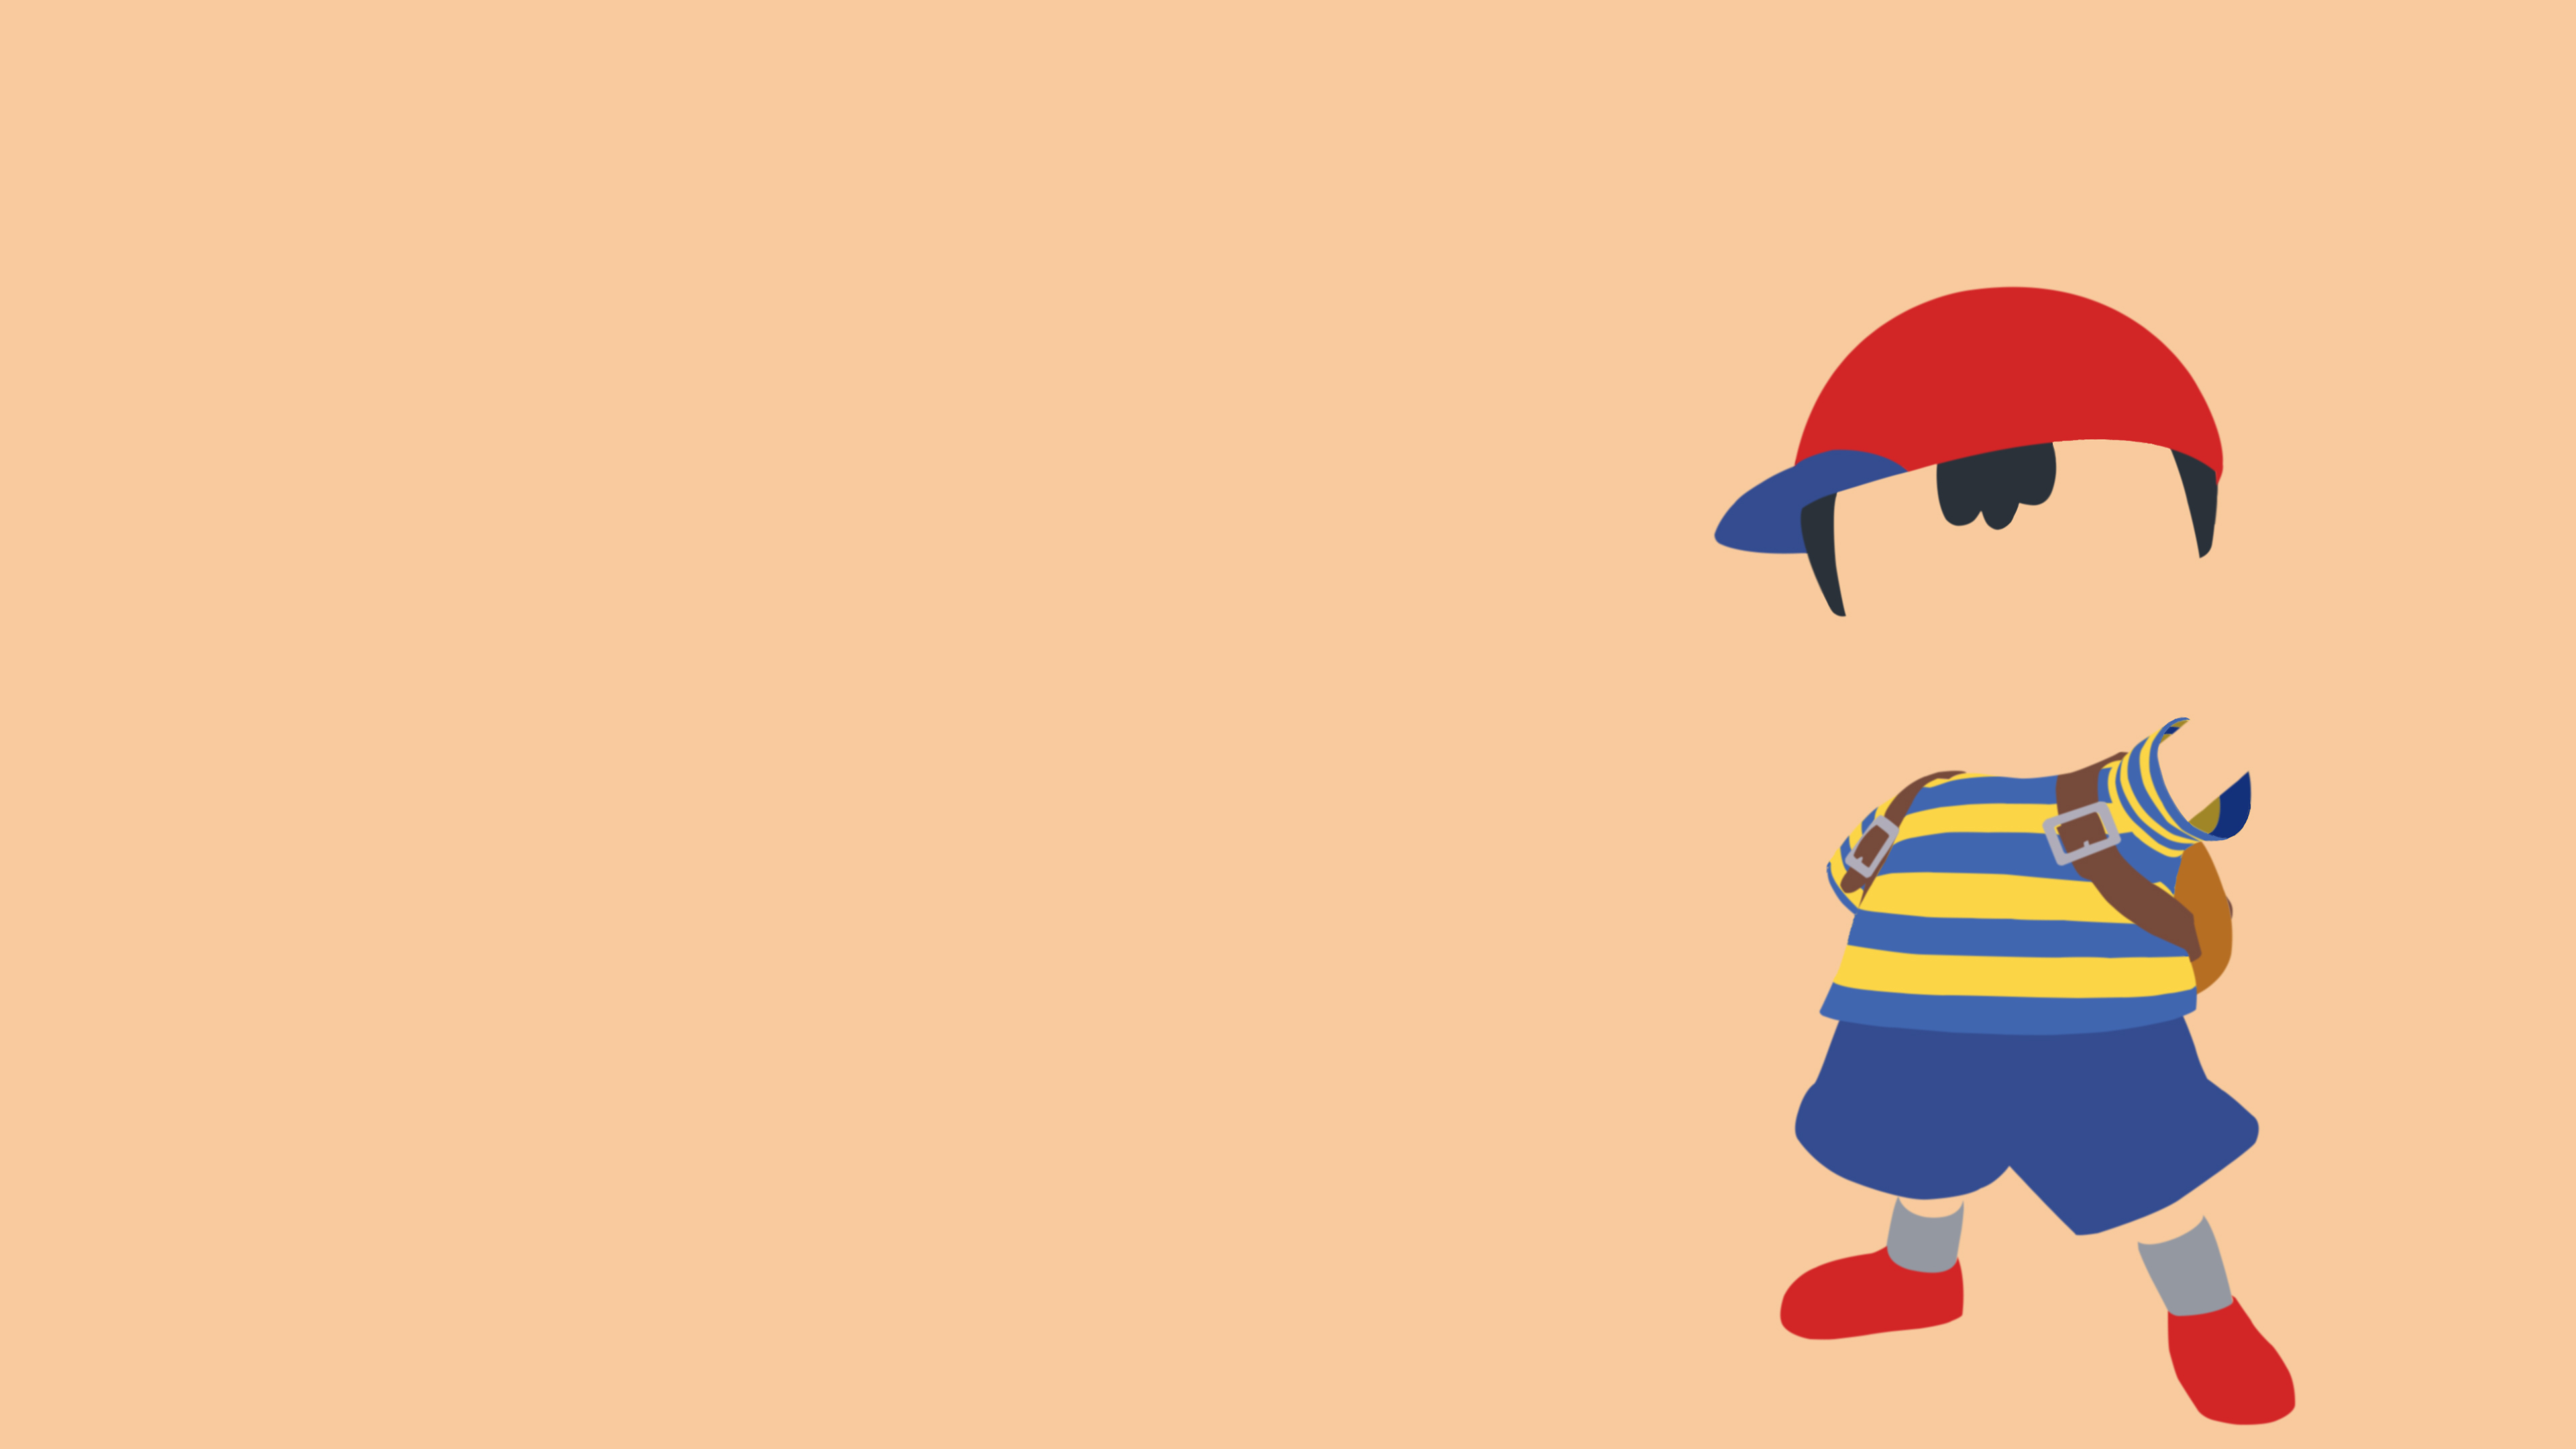 Ness   EarthboundMother2 minimalist wallpaper by LeadNash on